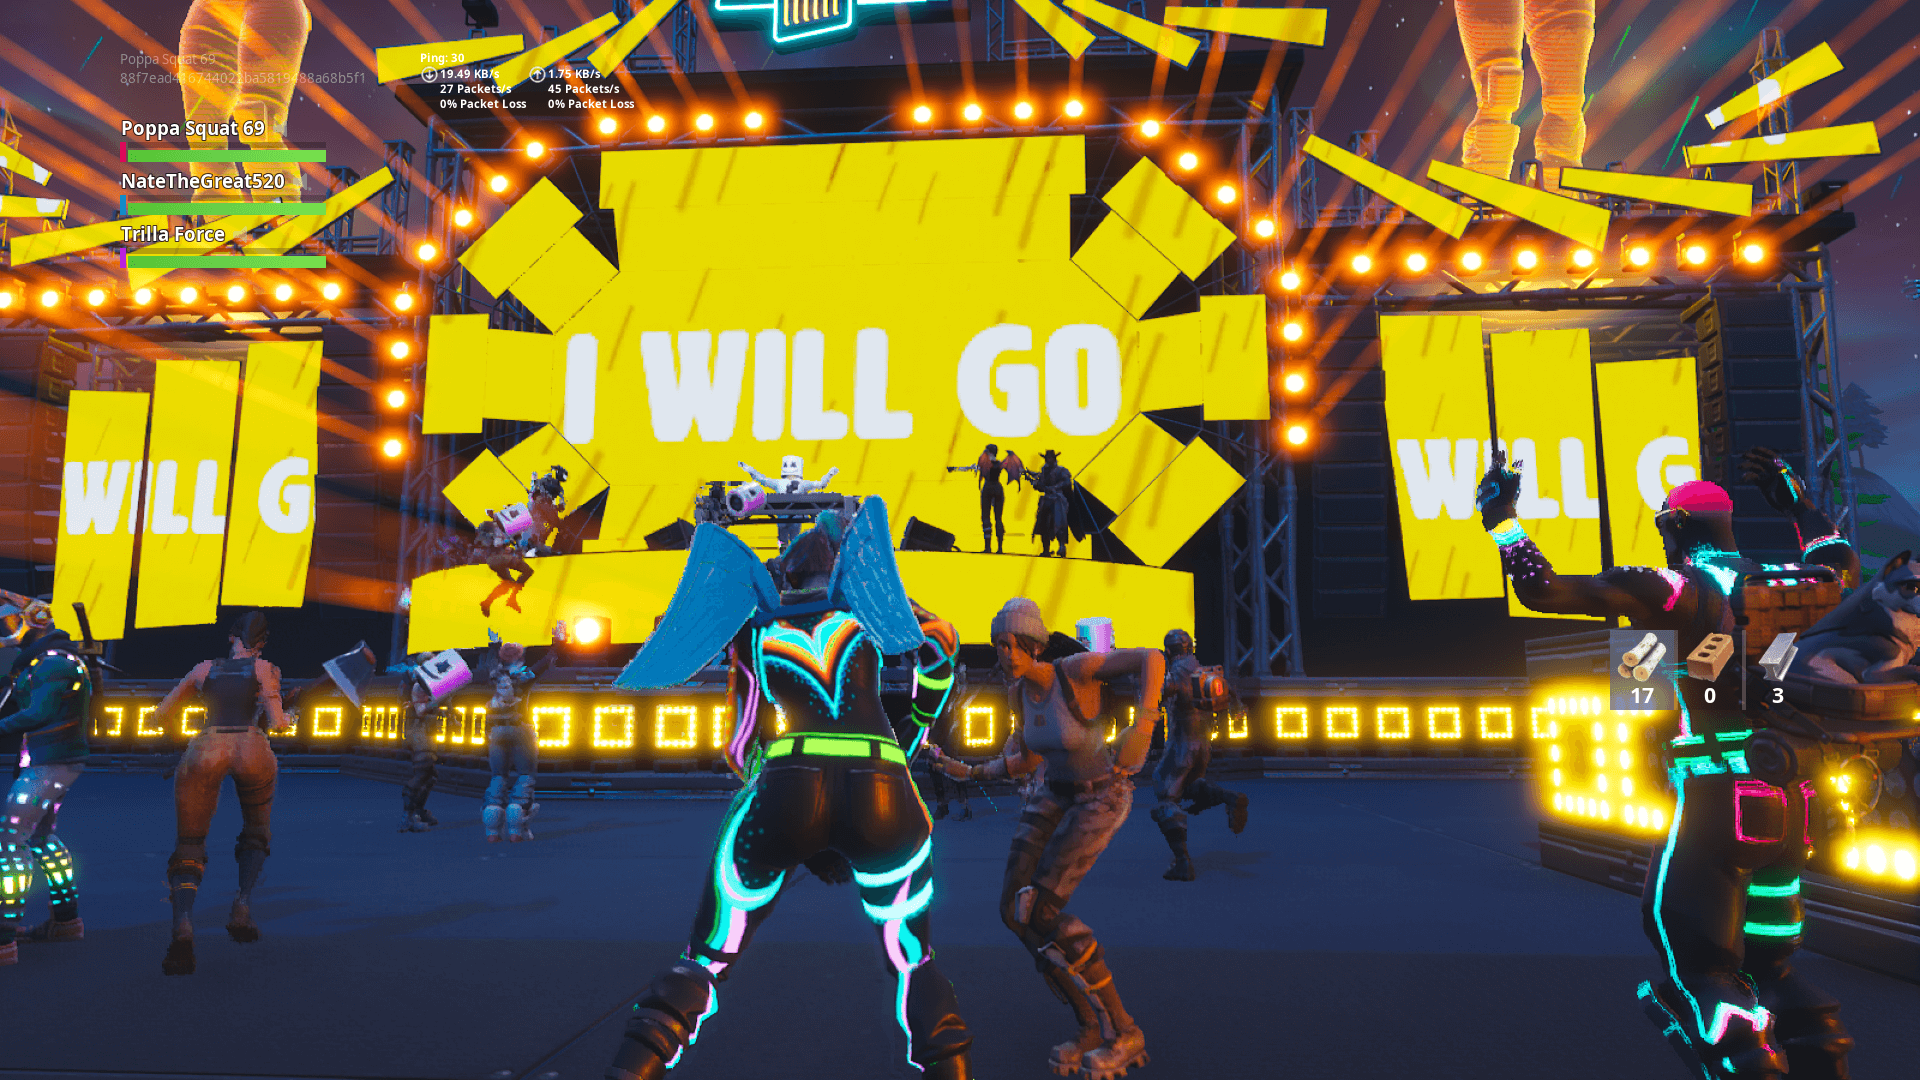 Marshmello Confirms He Was Live During Fortnite Concert - 1920 x 1080 png 668kB